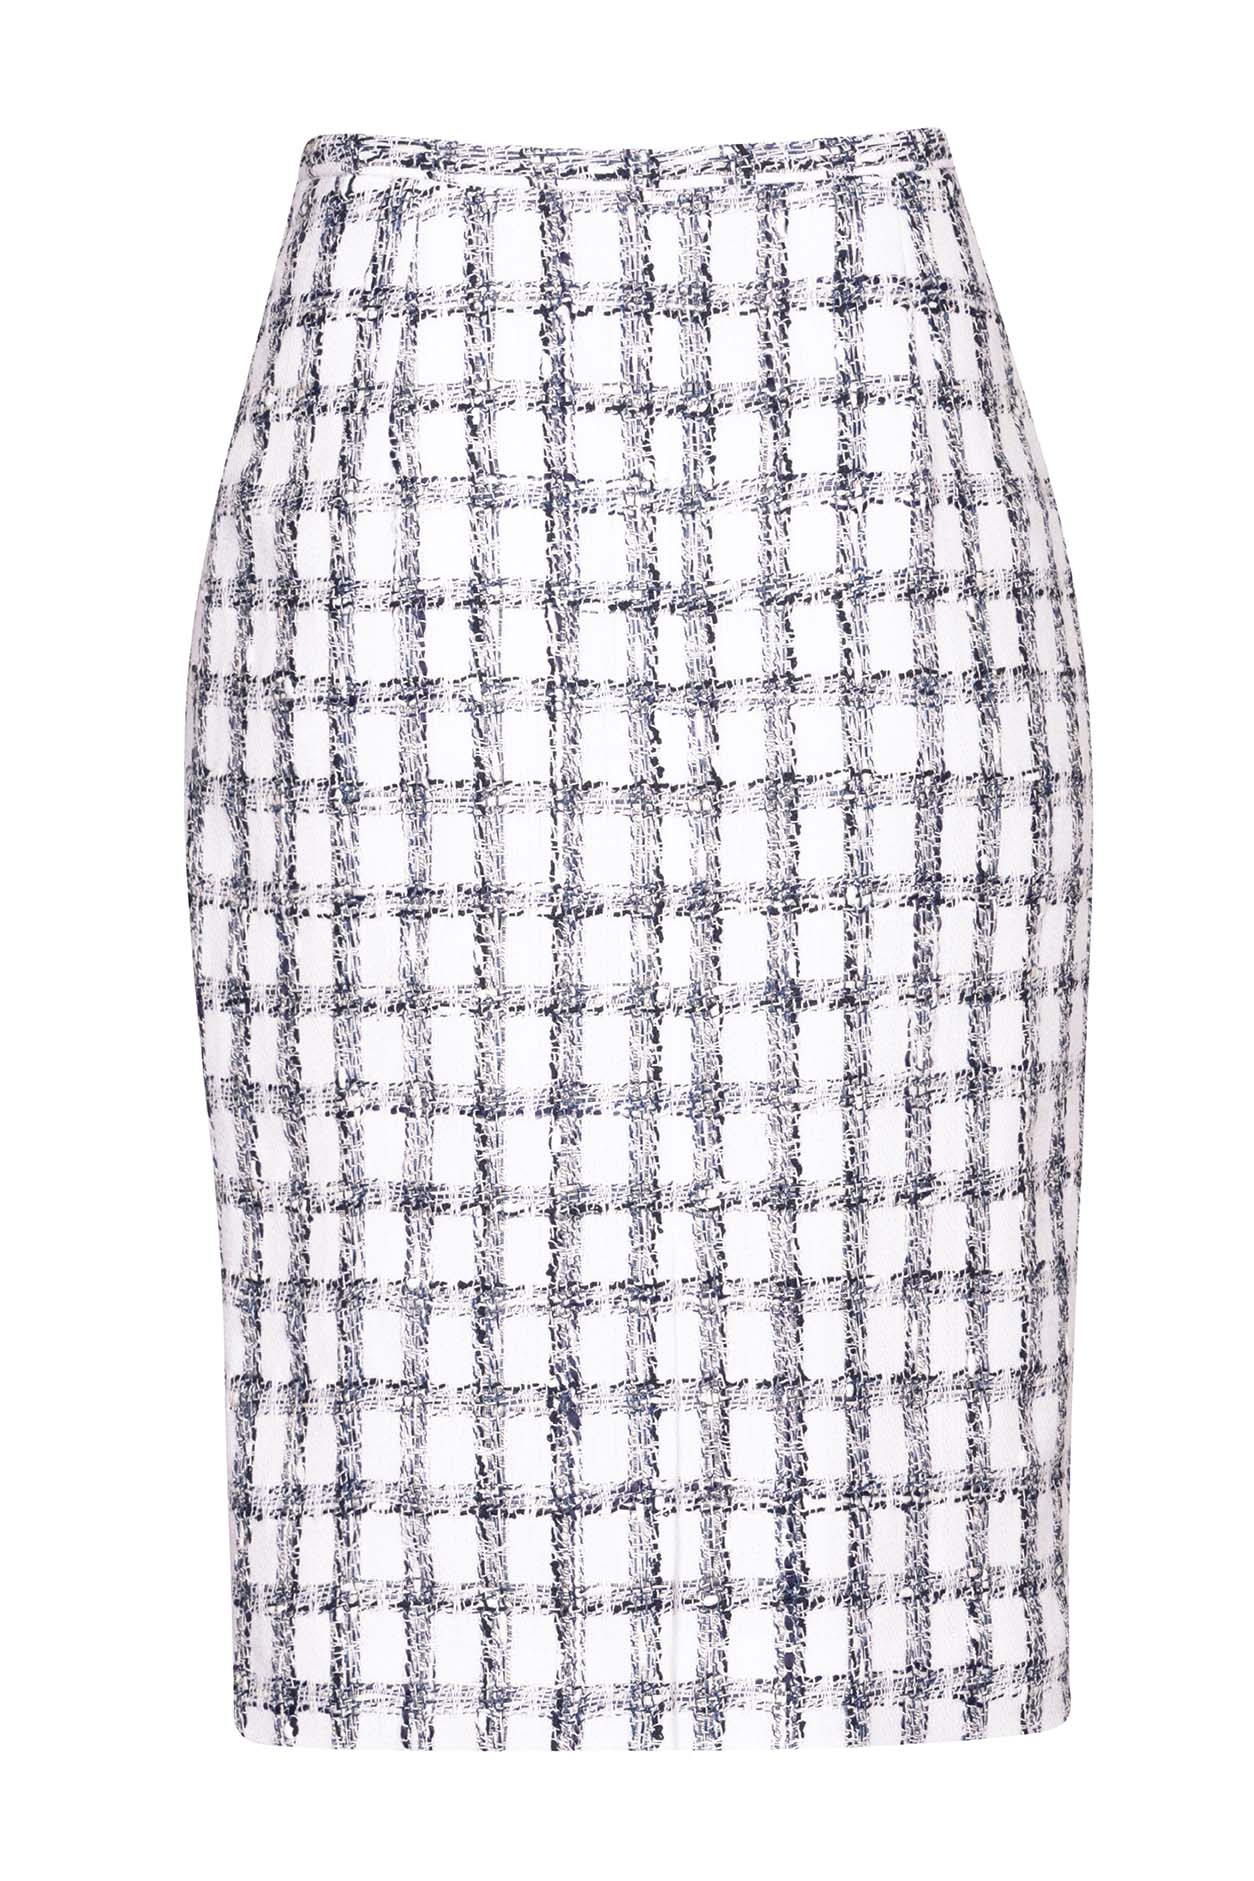 Tweed Pencil Skirt in White with Navy Overchecks - Penny